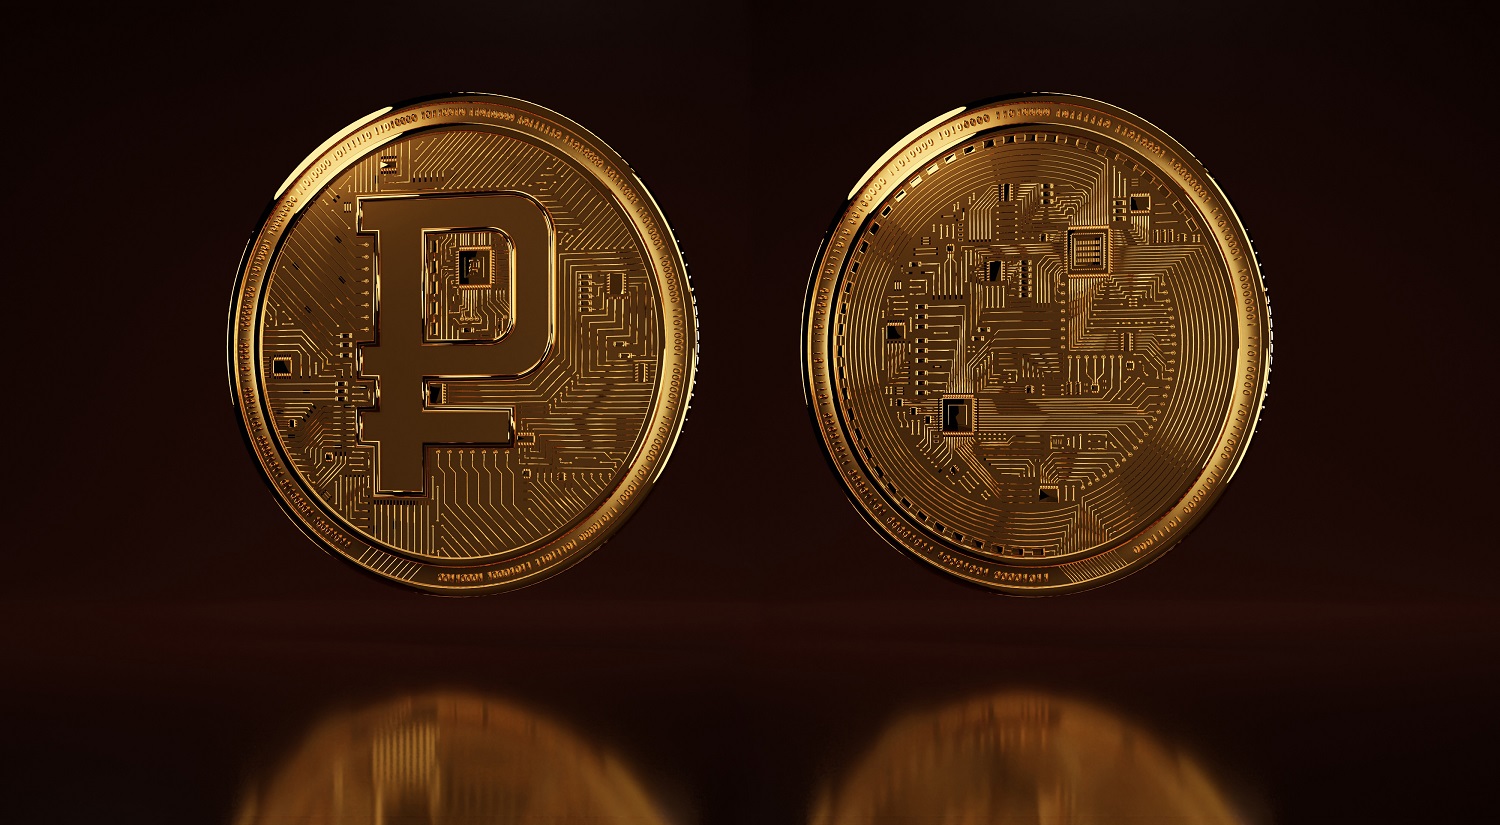 Two golden coins intended to represent the Russian digital ruble.